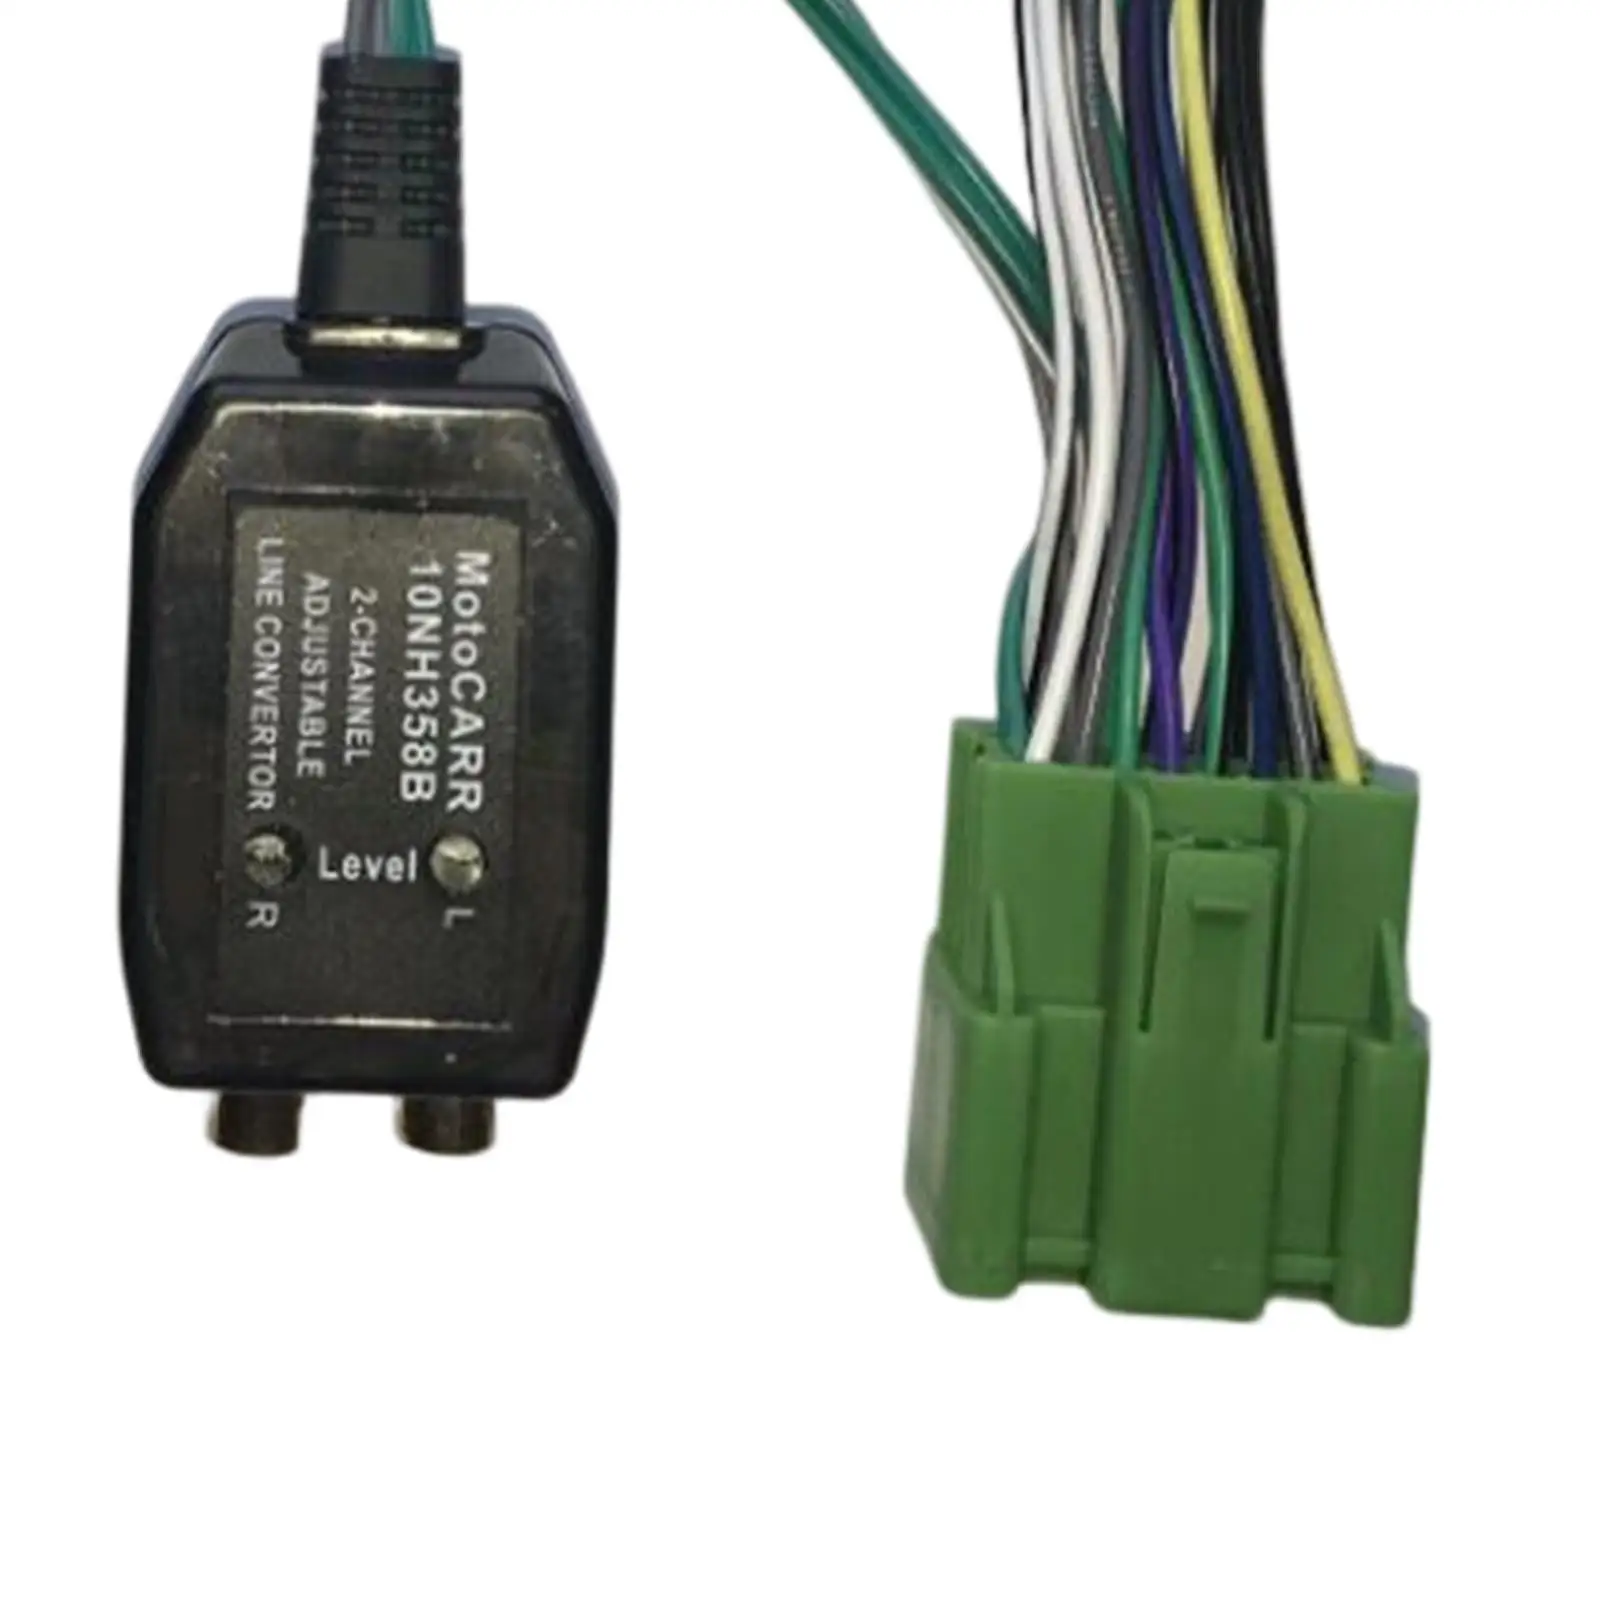 71-2107 Aftermarket Radio Wiring Harness Add Amplifier Adapter Interface Amp Select for Direct Replaces Supplies Parts